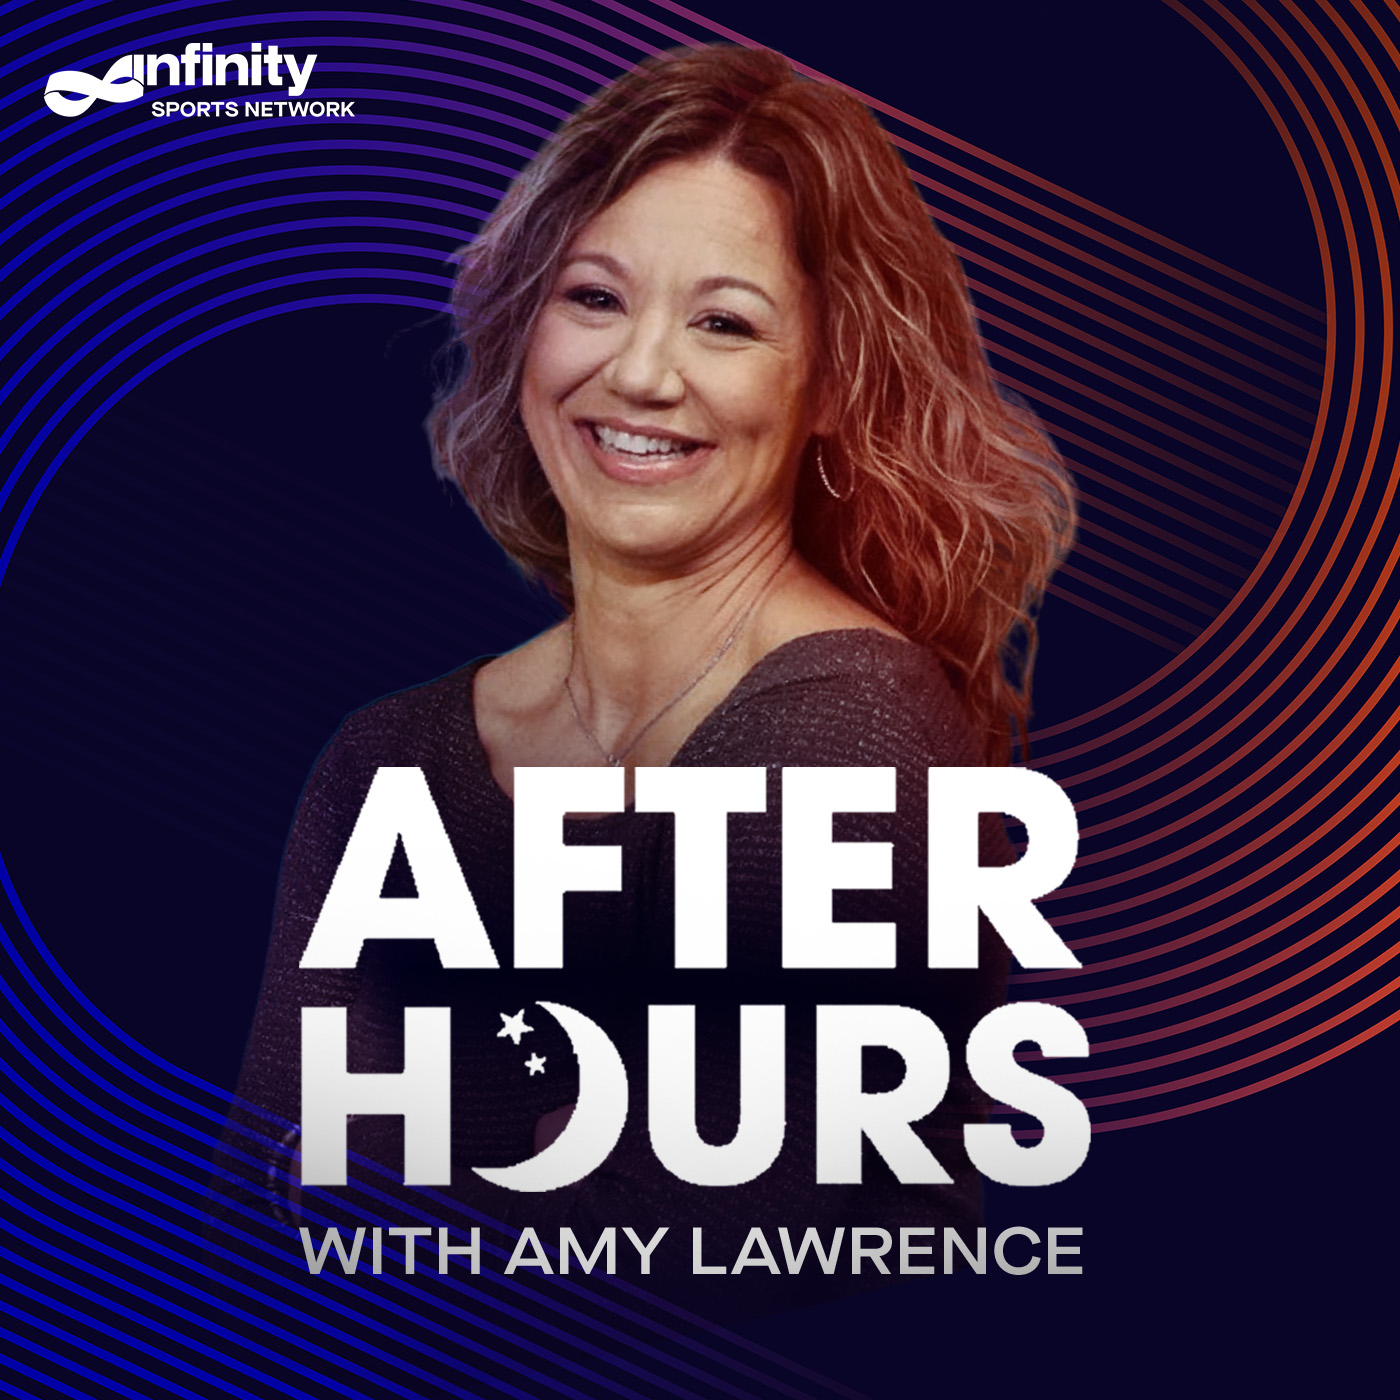 4/28/21 After Hours with Amy Lawrence PODCAST: Hour 3